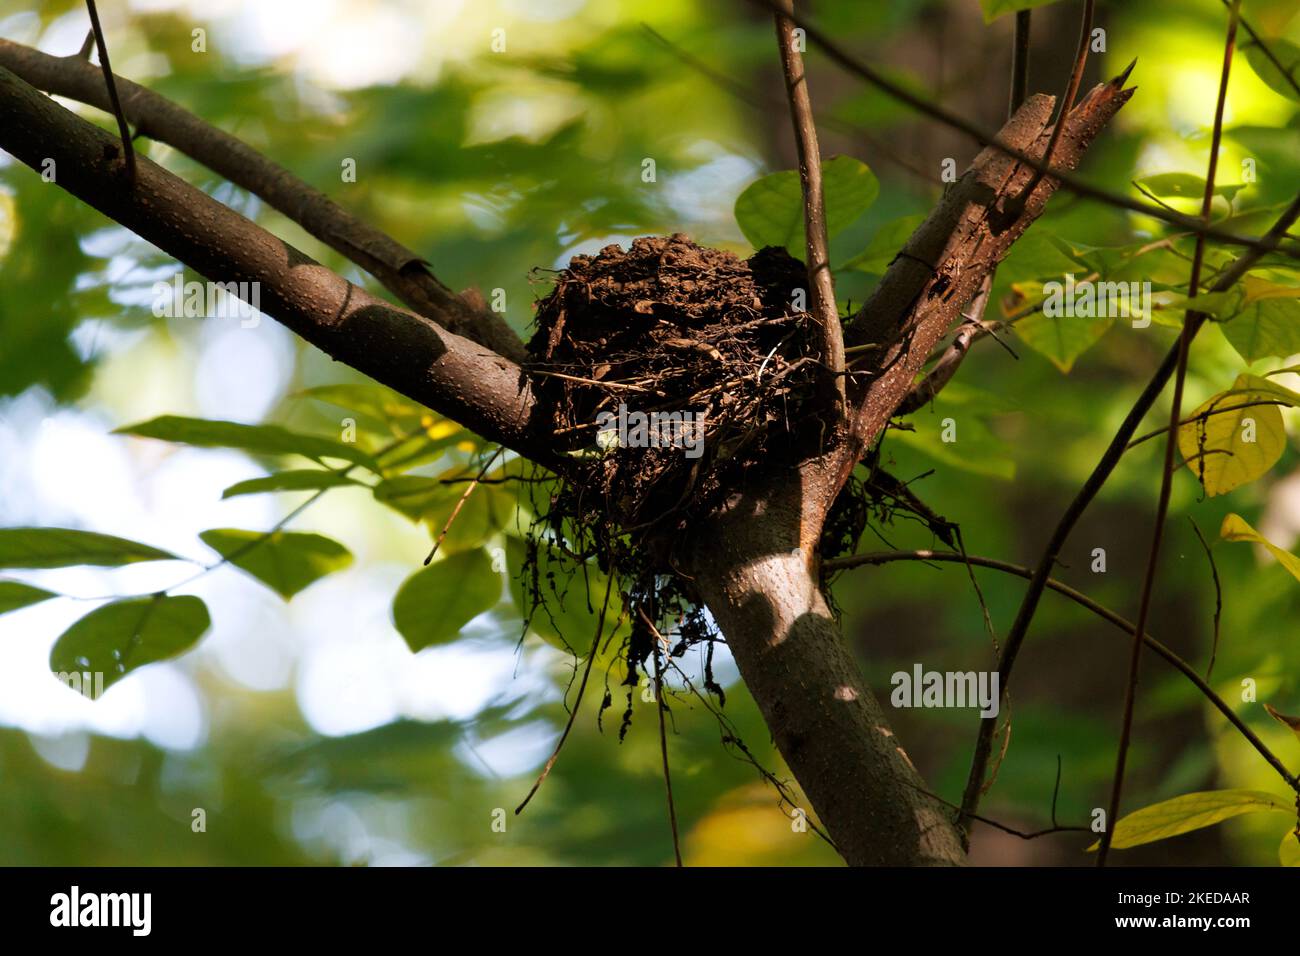 a bird's nest made with mud, twigs and leaves, probably made by an American Robin, in the crook of tree branches with foliage and high contrast light Stock Photo